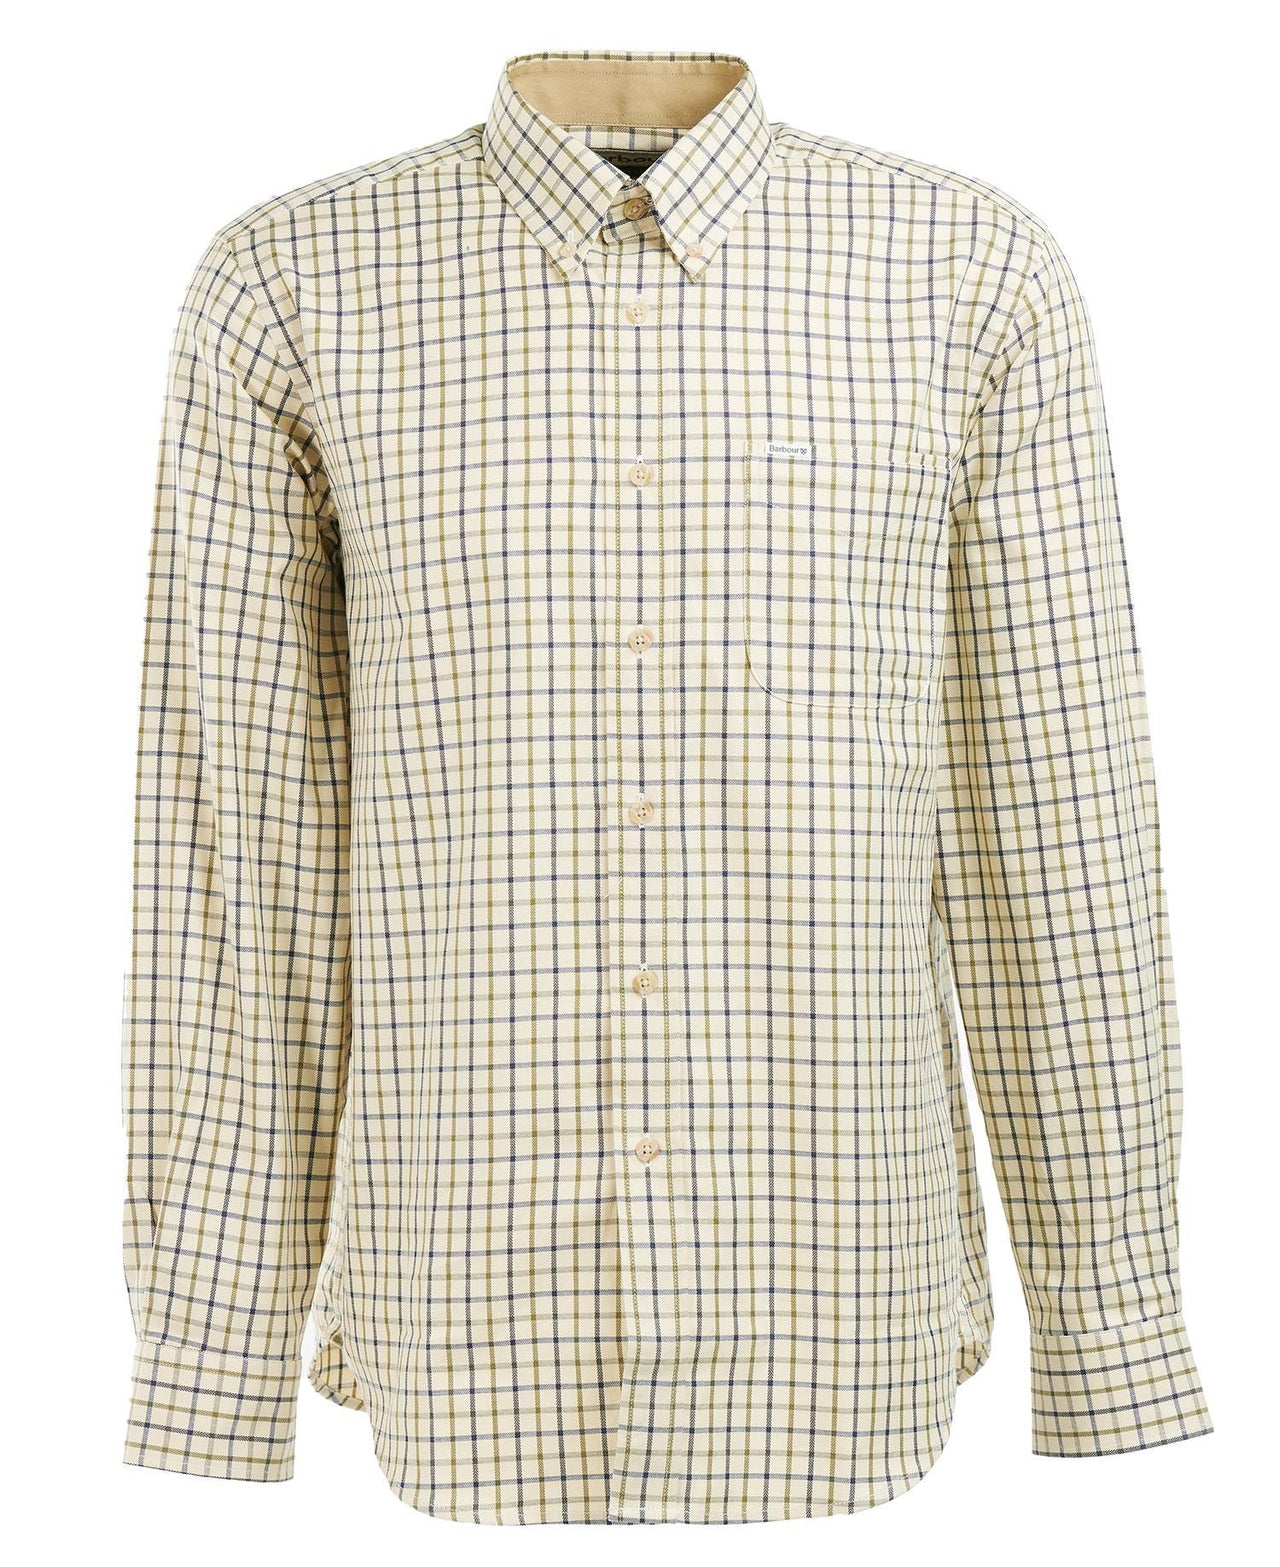 Barbour Tattersall Shirt - Navy/Olive